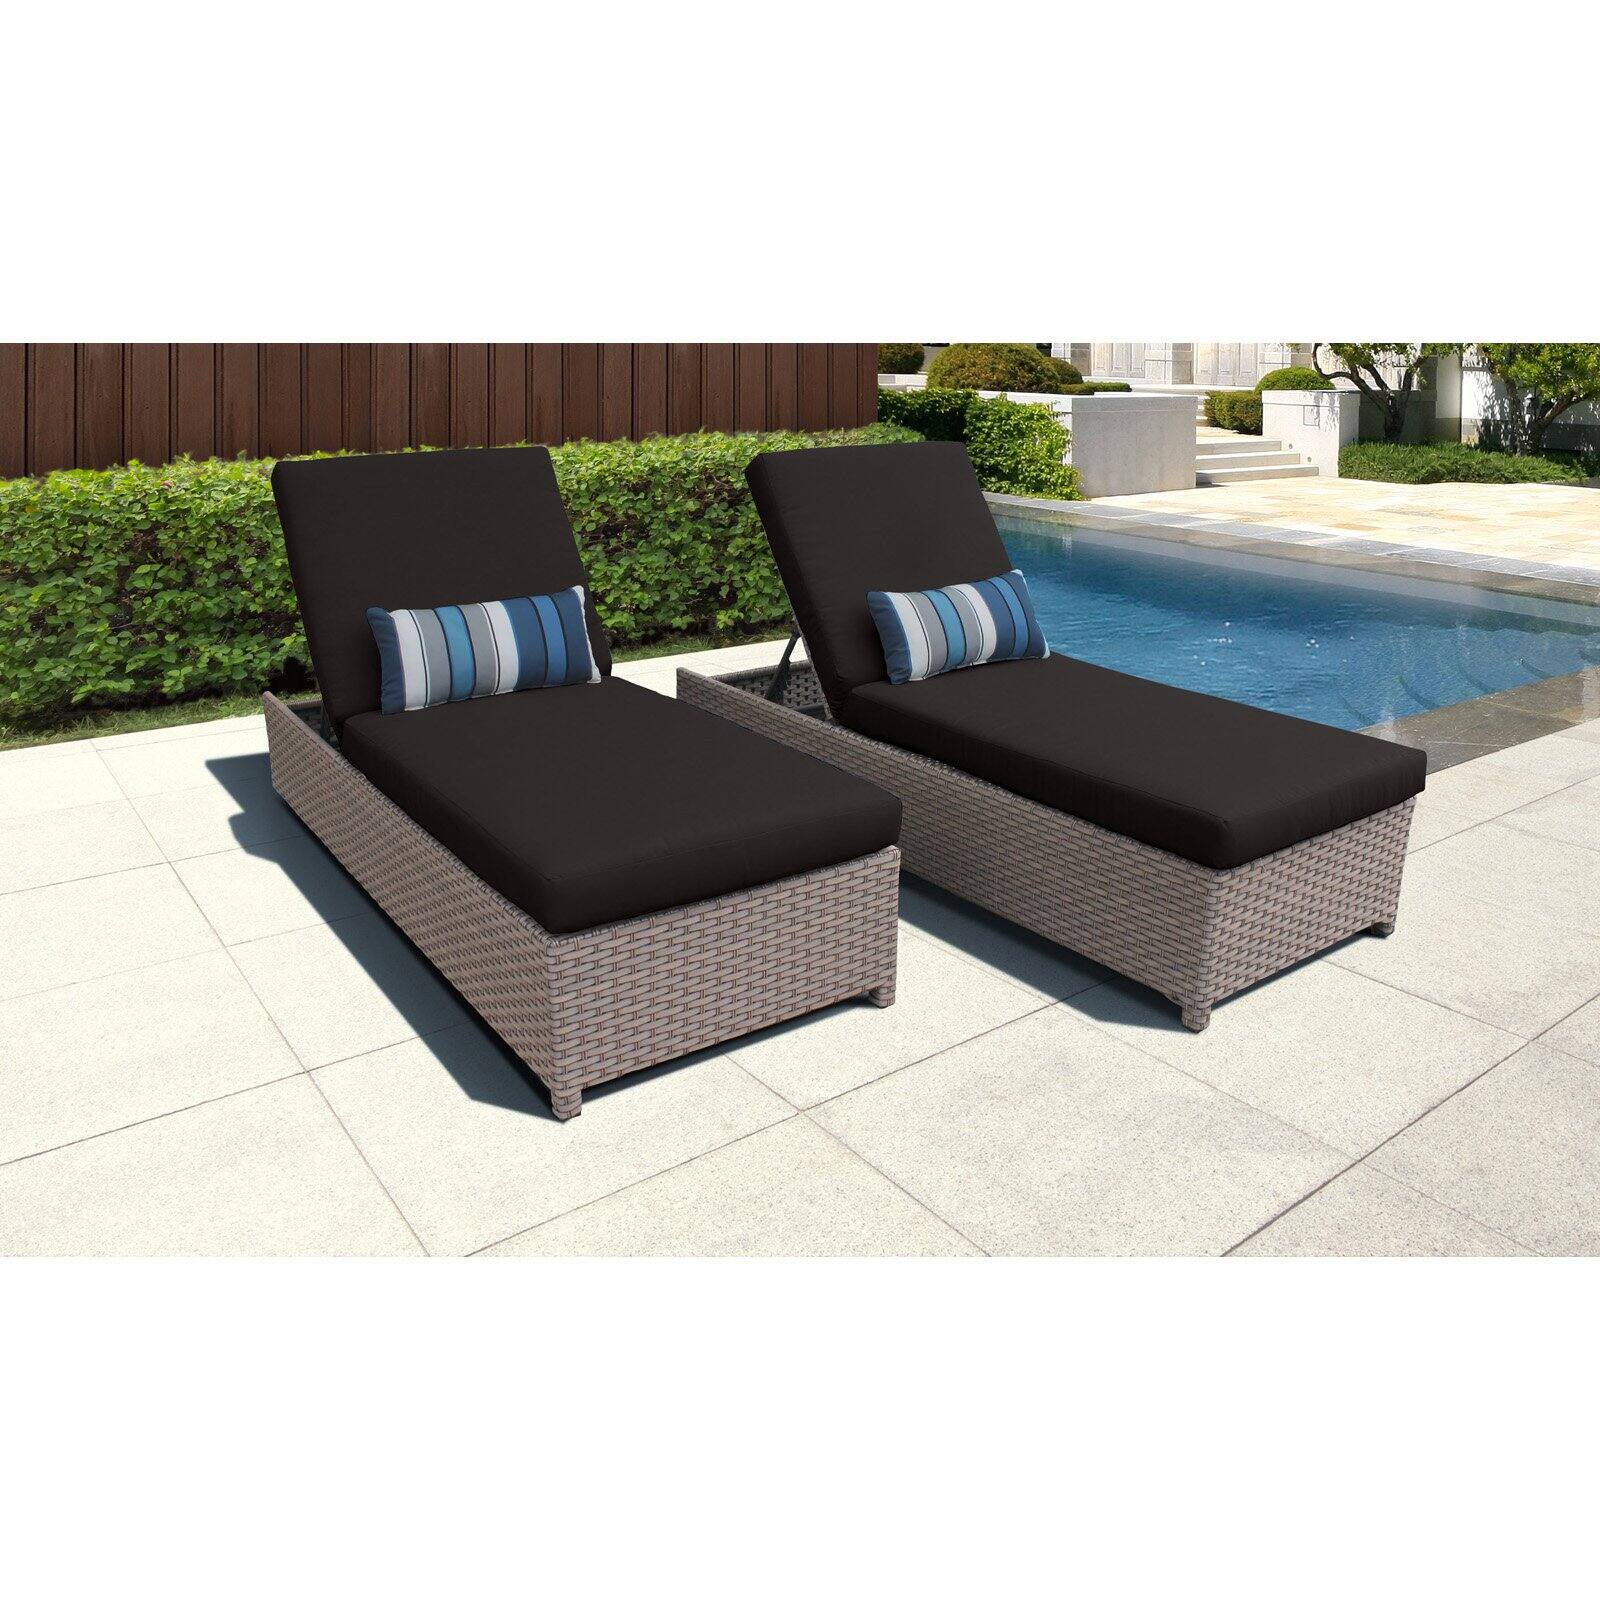 TK Classics Monterey Wheeled Wicker Outdoor Chaise Lounge Chair - Set of 2 - image 5 of 11